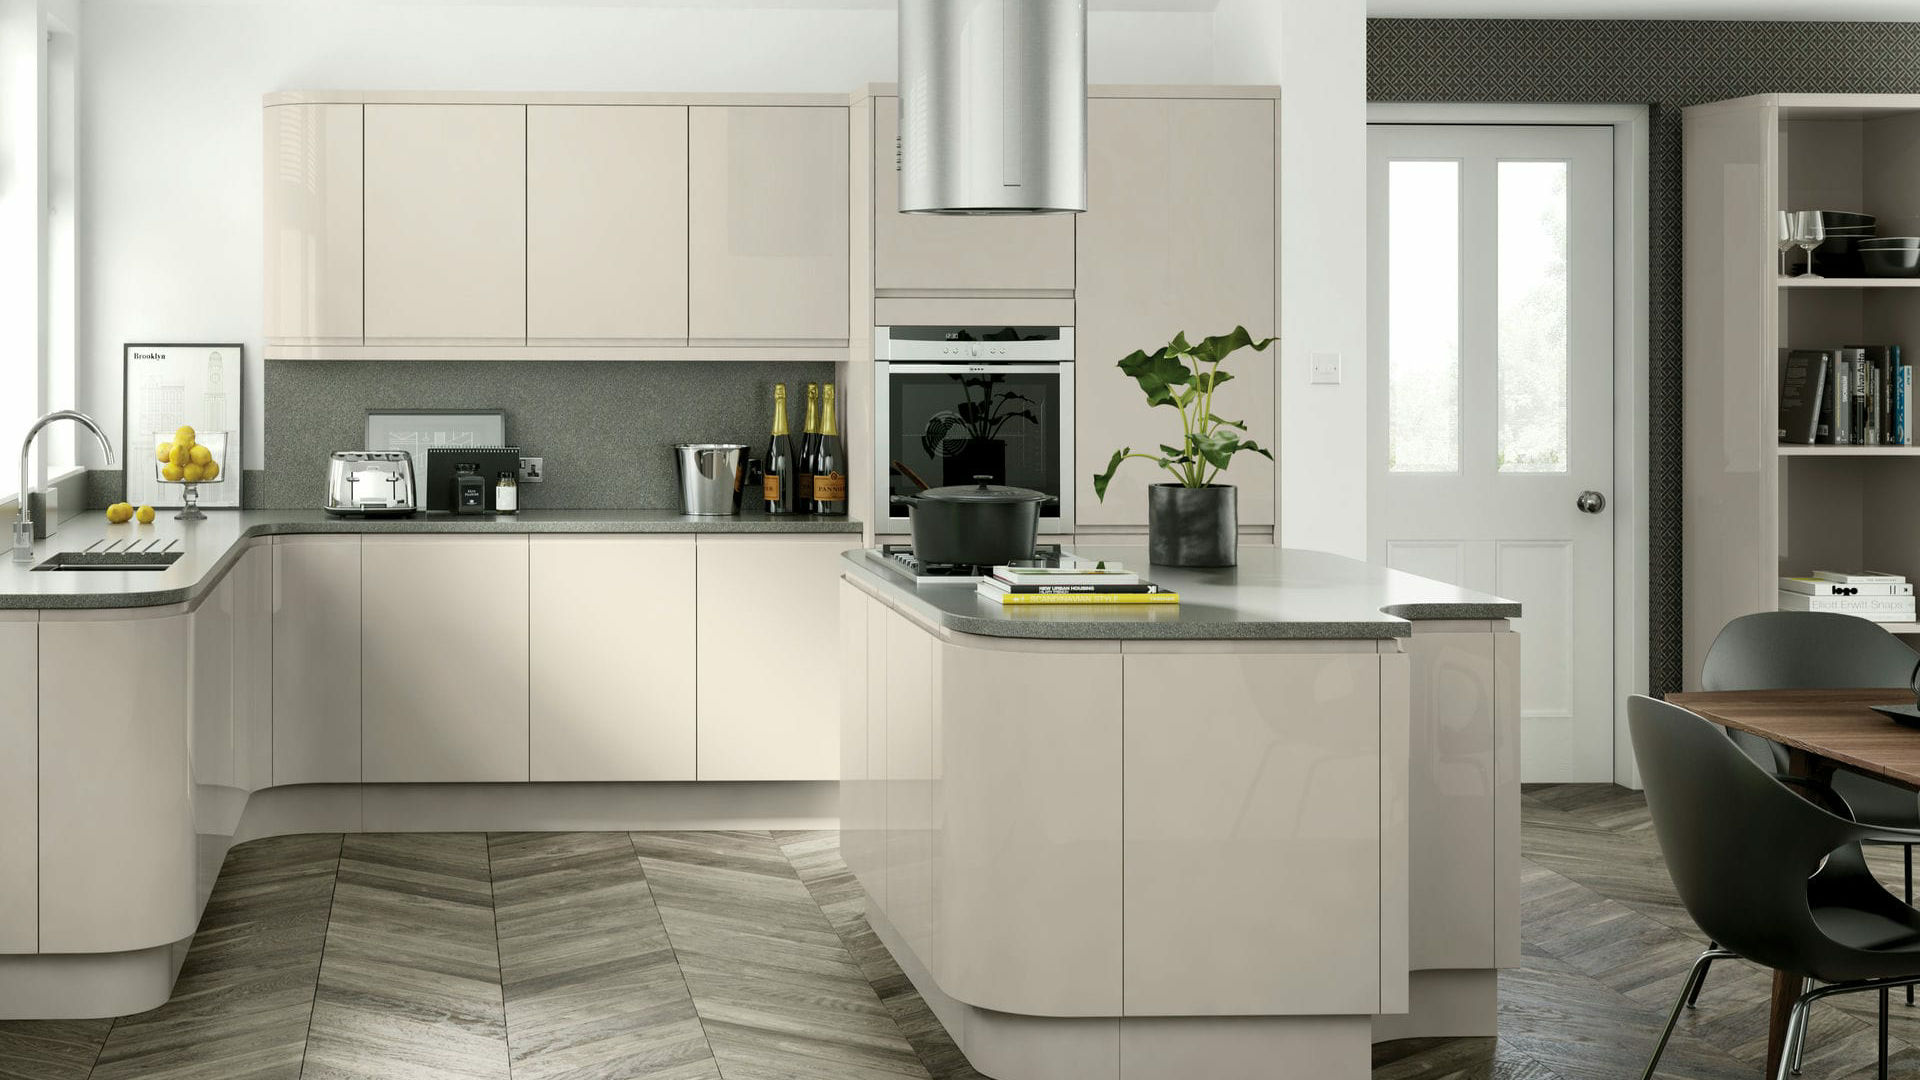 Handleless High Gloss Cashmere kitchen exuding minimalist chic with a glossy, sophisticated look